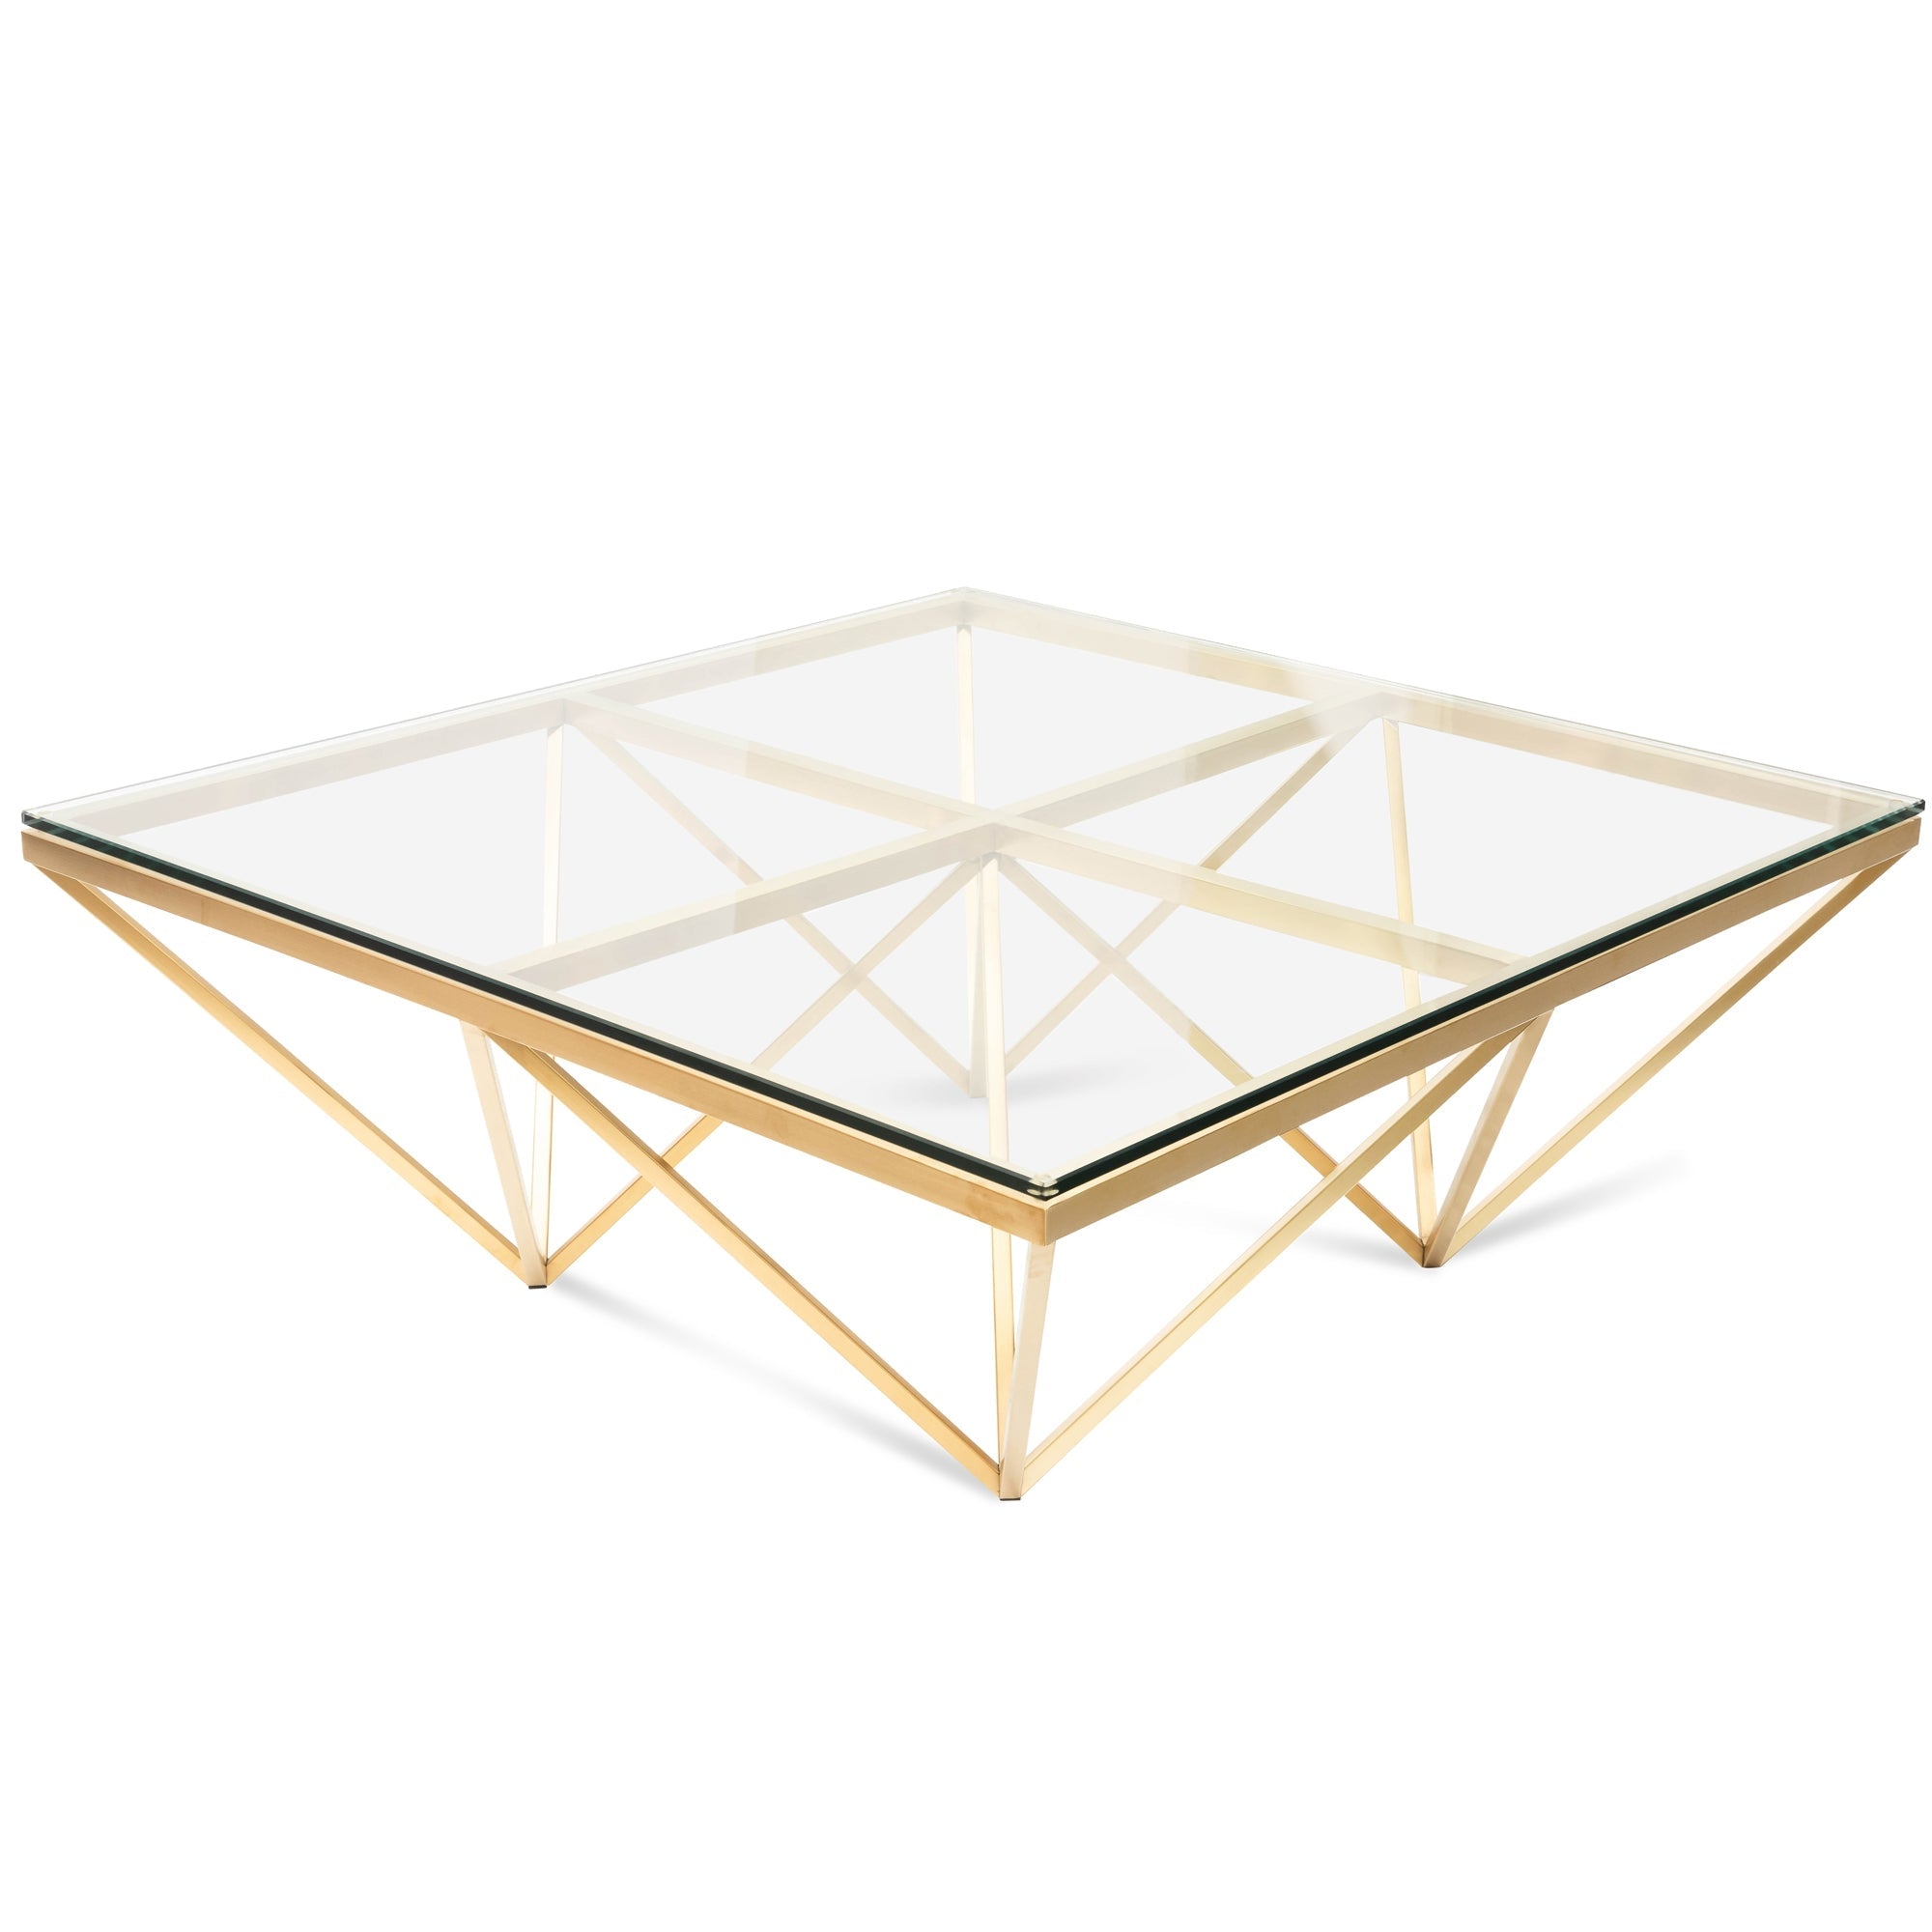 1.05m Glass Coffee Table - Brushed Gold Base_2